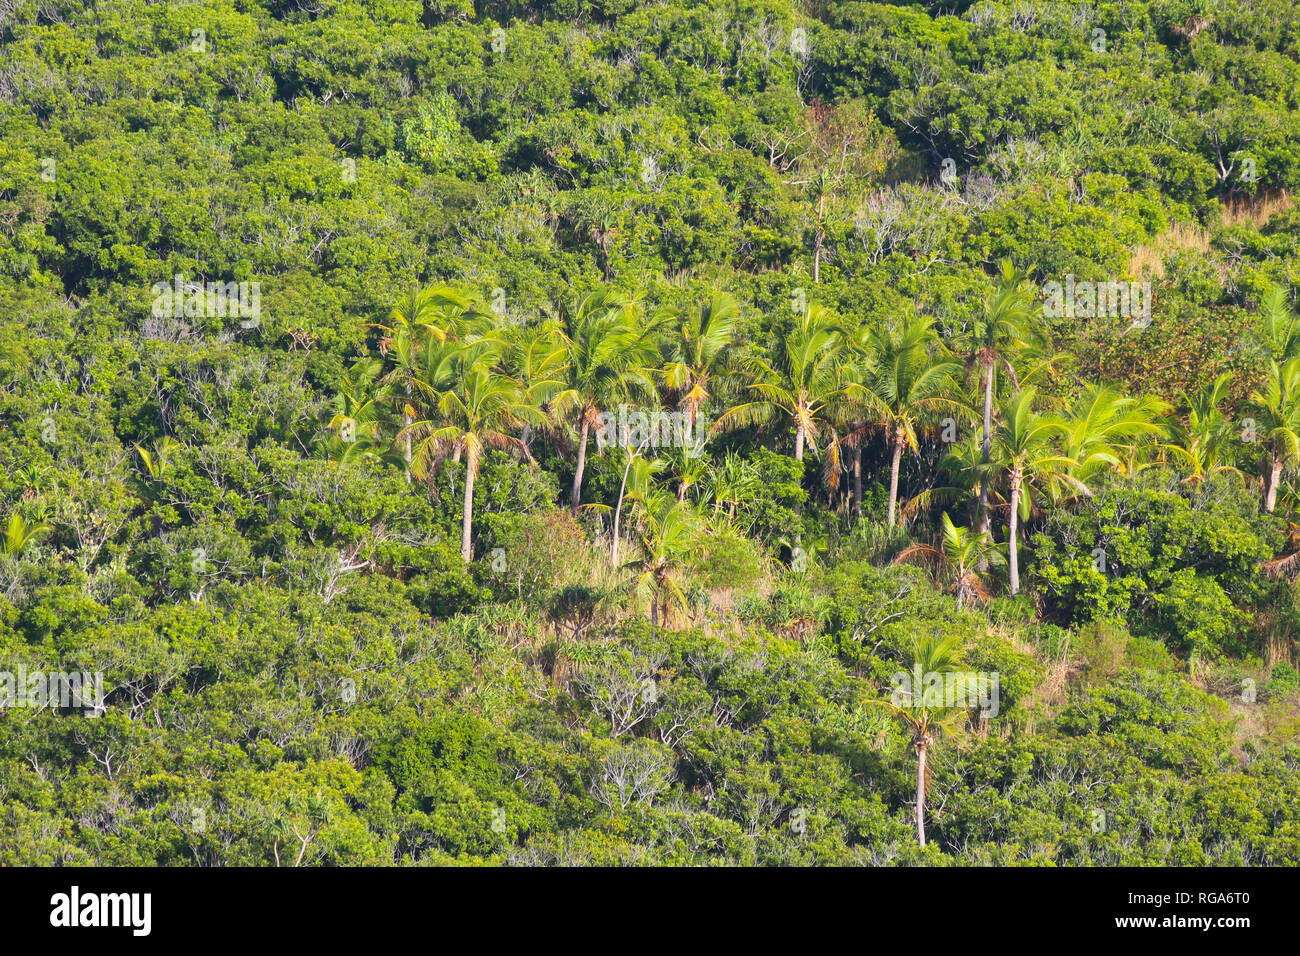 Monu Island High Resolution Stock Photography and Images - Alamy